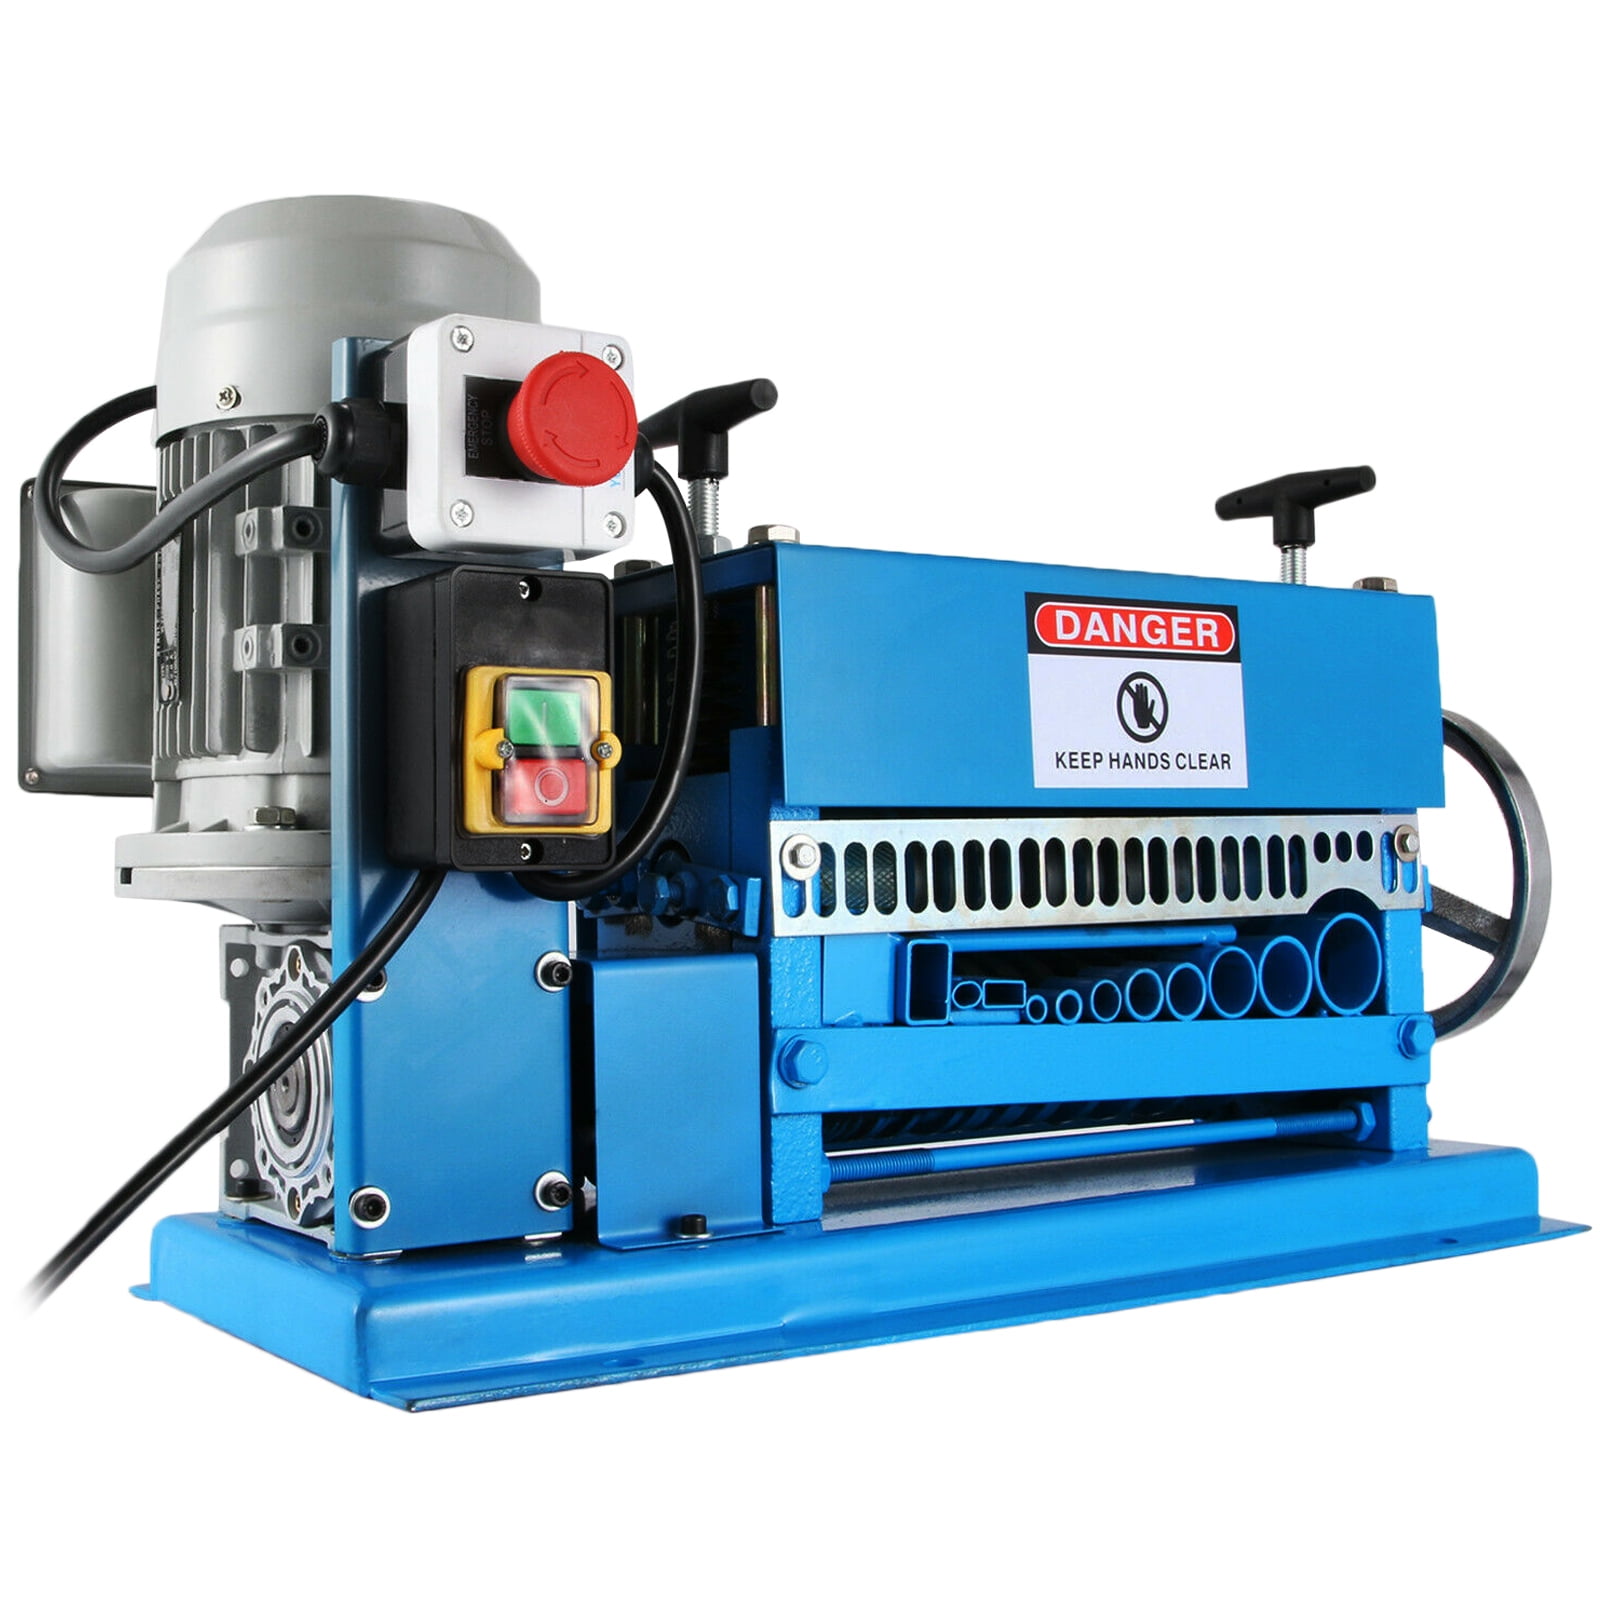 Wire Stripping Machine Durable Copper Hand Crank Metal Tool Scrap Cable Stripper 